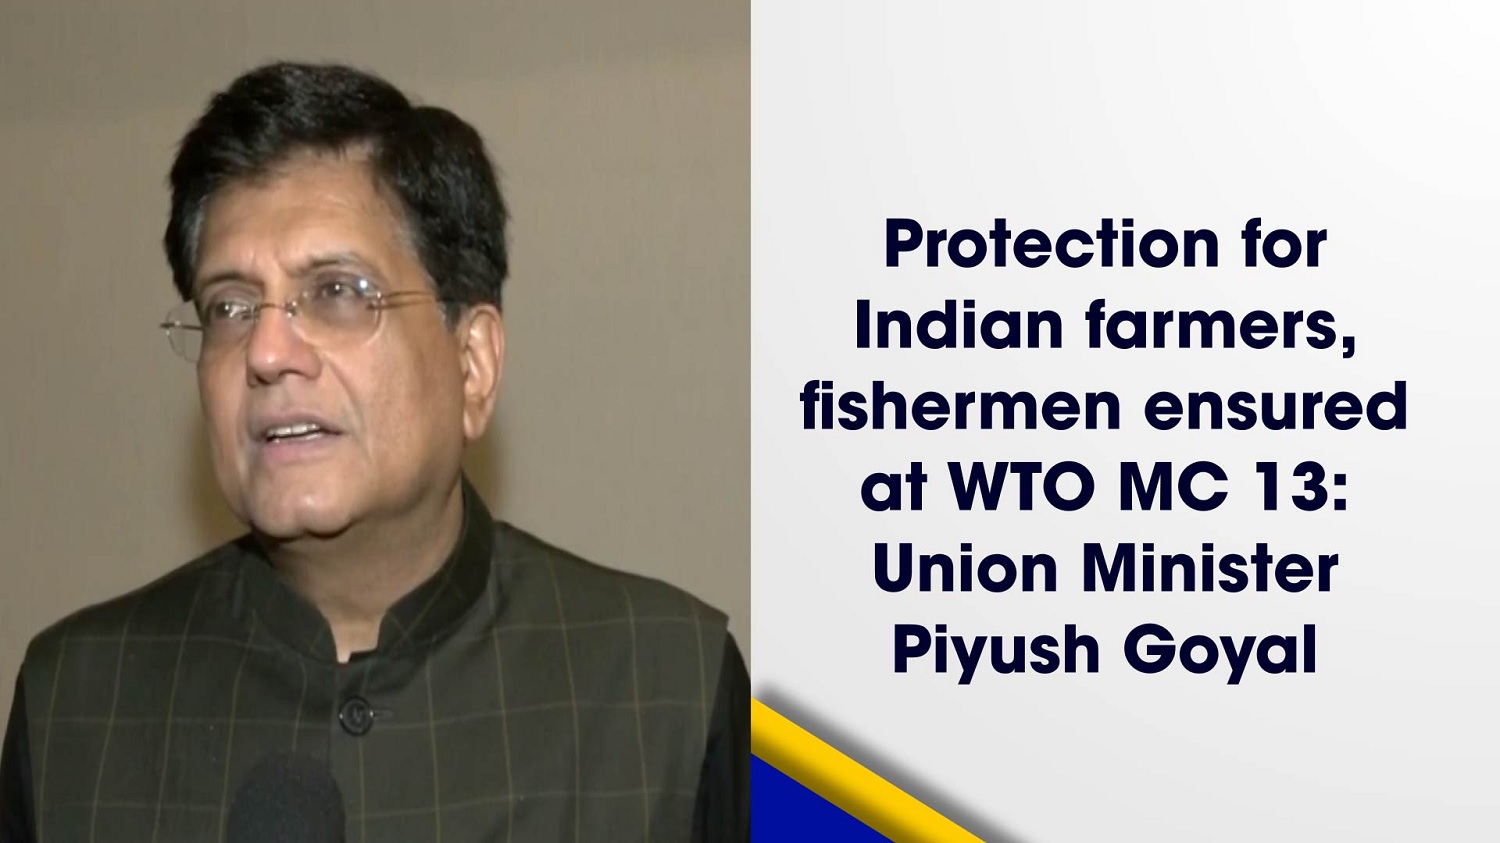 Protection for Indian farmers, fishermen ensured at WTO MC 13: Union Minister Piyush Goyal